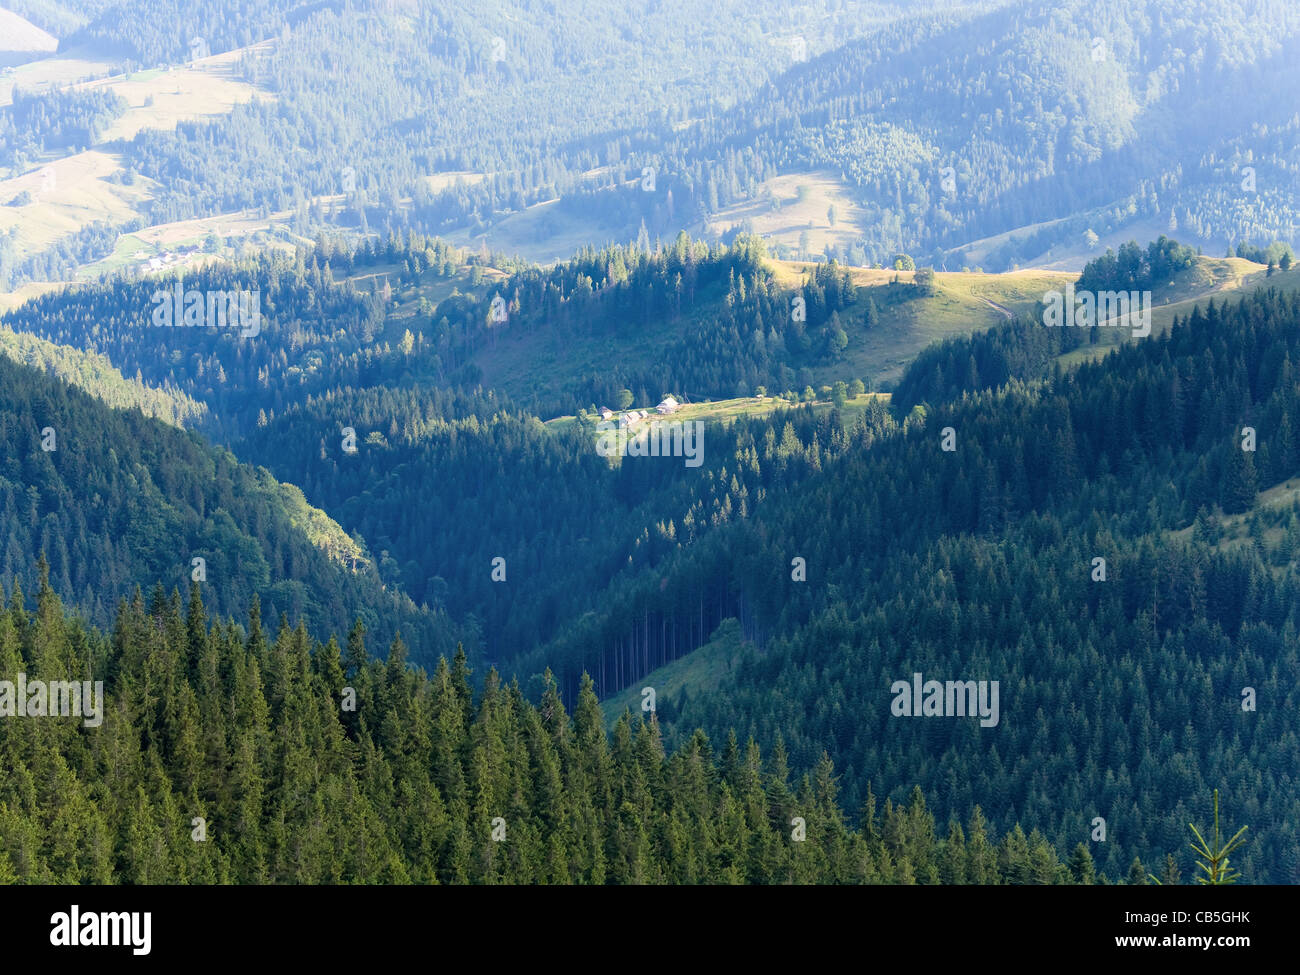 Summer mountain village landscape with hamlet on hill top Stock Photo